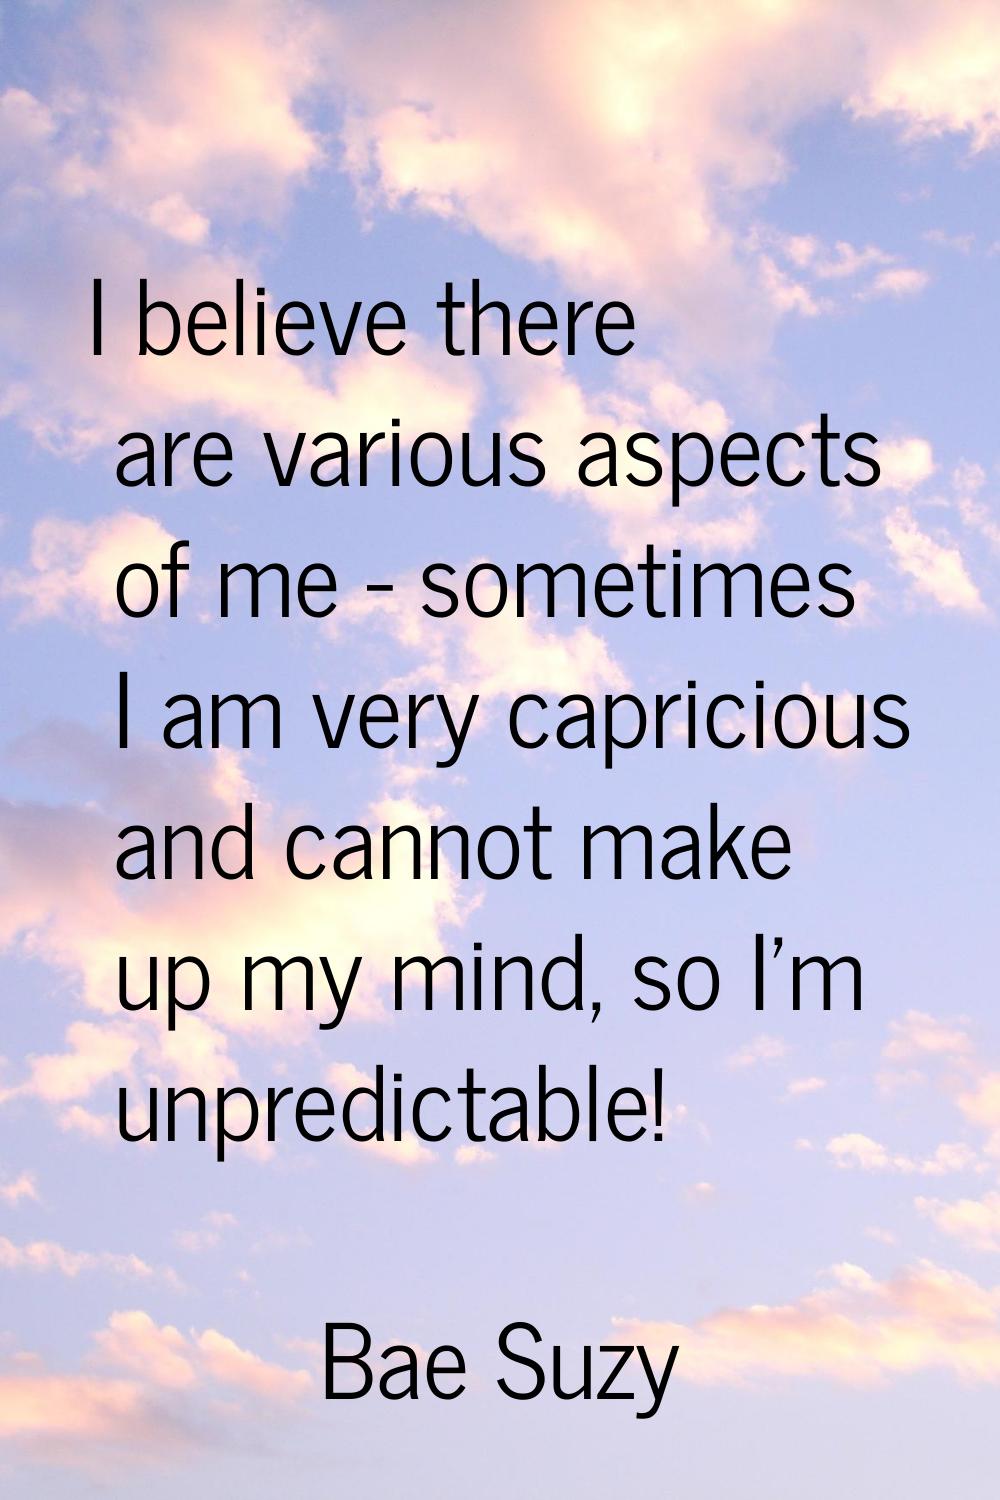 I believe there are various aspects of me - sometimes I am very capricious and cannot make up my mi